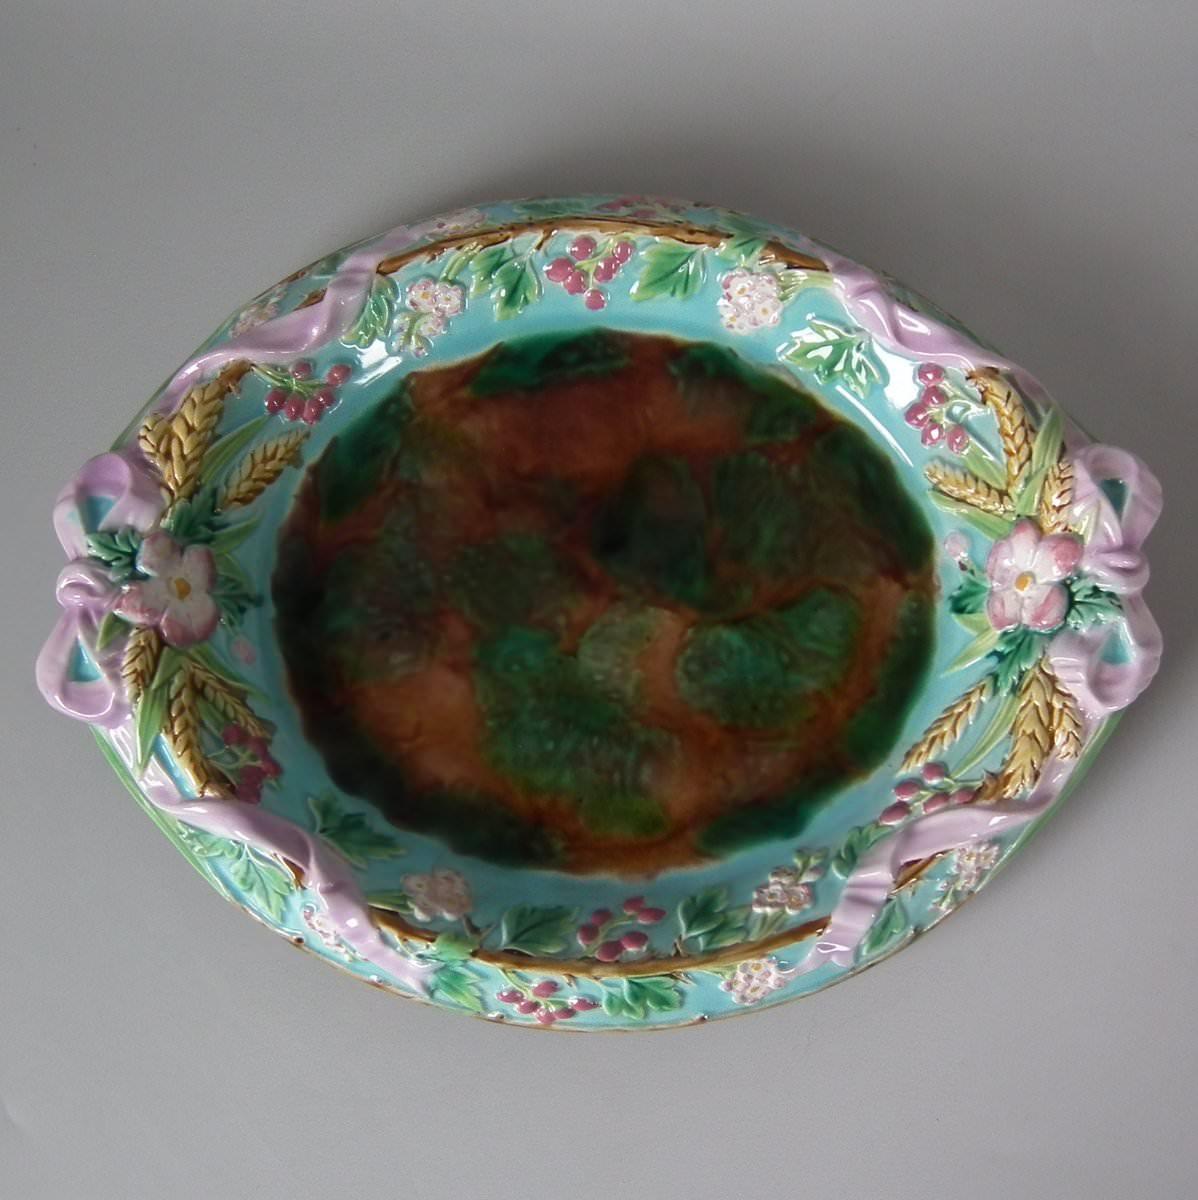 George Jones Majolica bread platter which features hawthorn, ribbon and wheat. Coloration: green, turquoise, pink, are predominant. Bears a pattern number, '1855'.